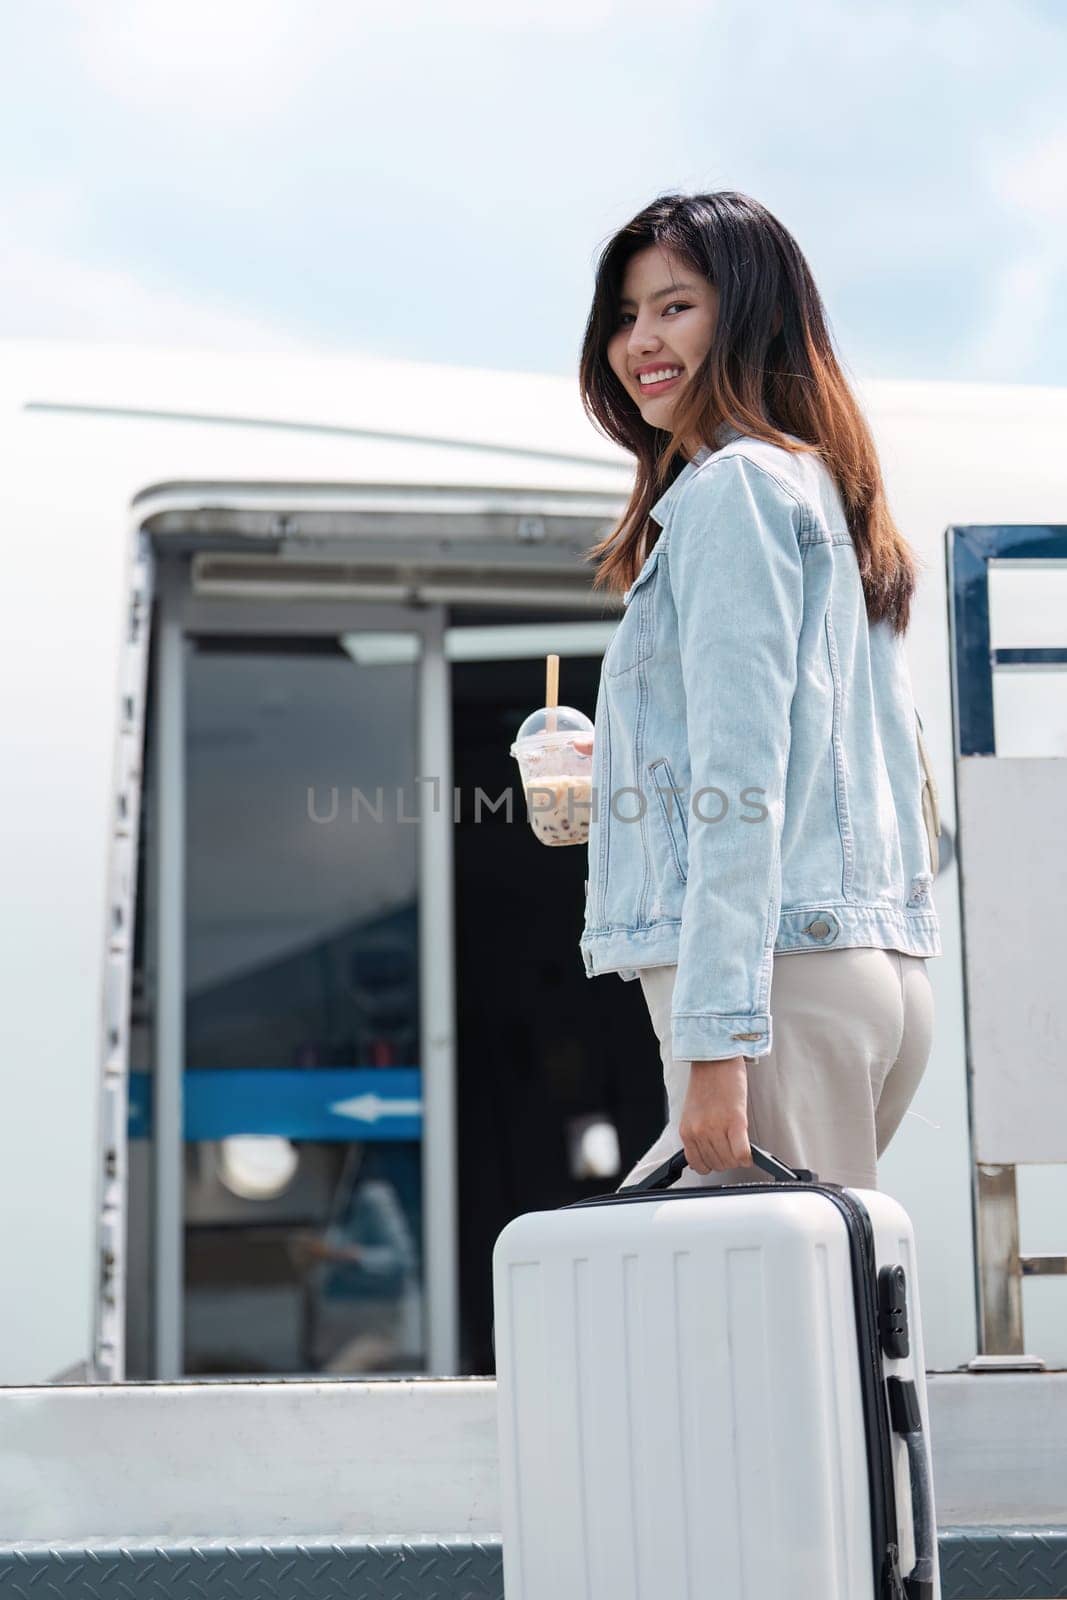 A woman is smiling and holding a cup of coffee while standing next to a suitcase. Concept of travel and adventure, as the woman is preparing to embark on a journey